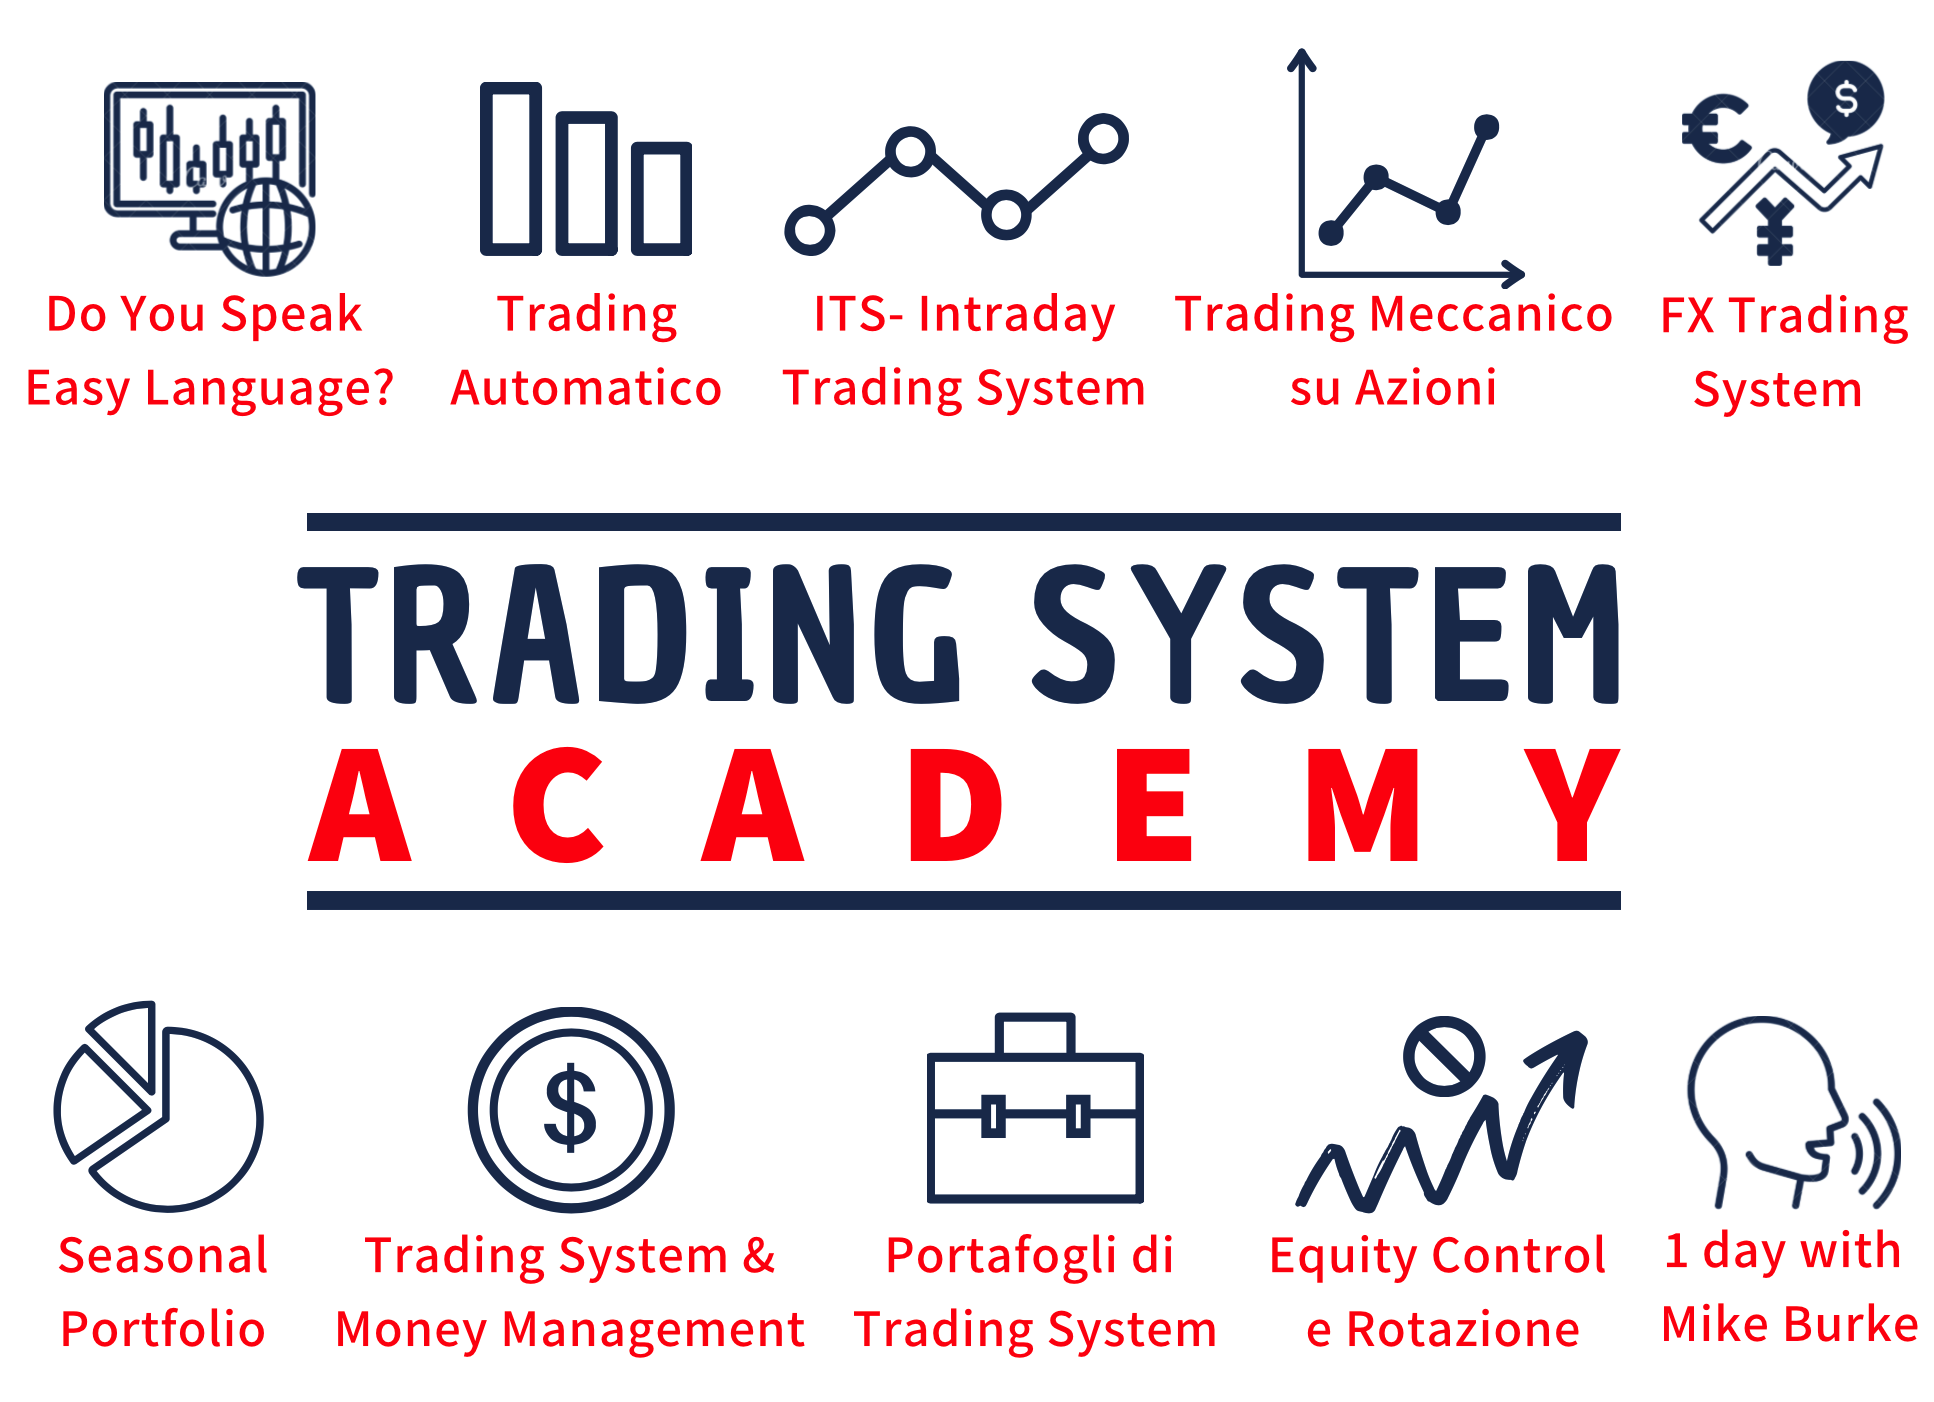 qtlab trading academy: miglior corso trading system and methods, online trading system e come costruire trading system automatico